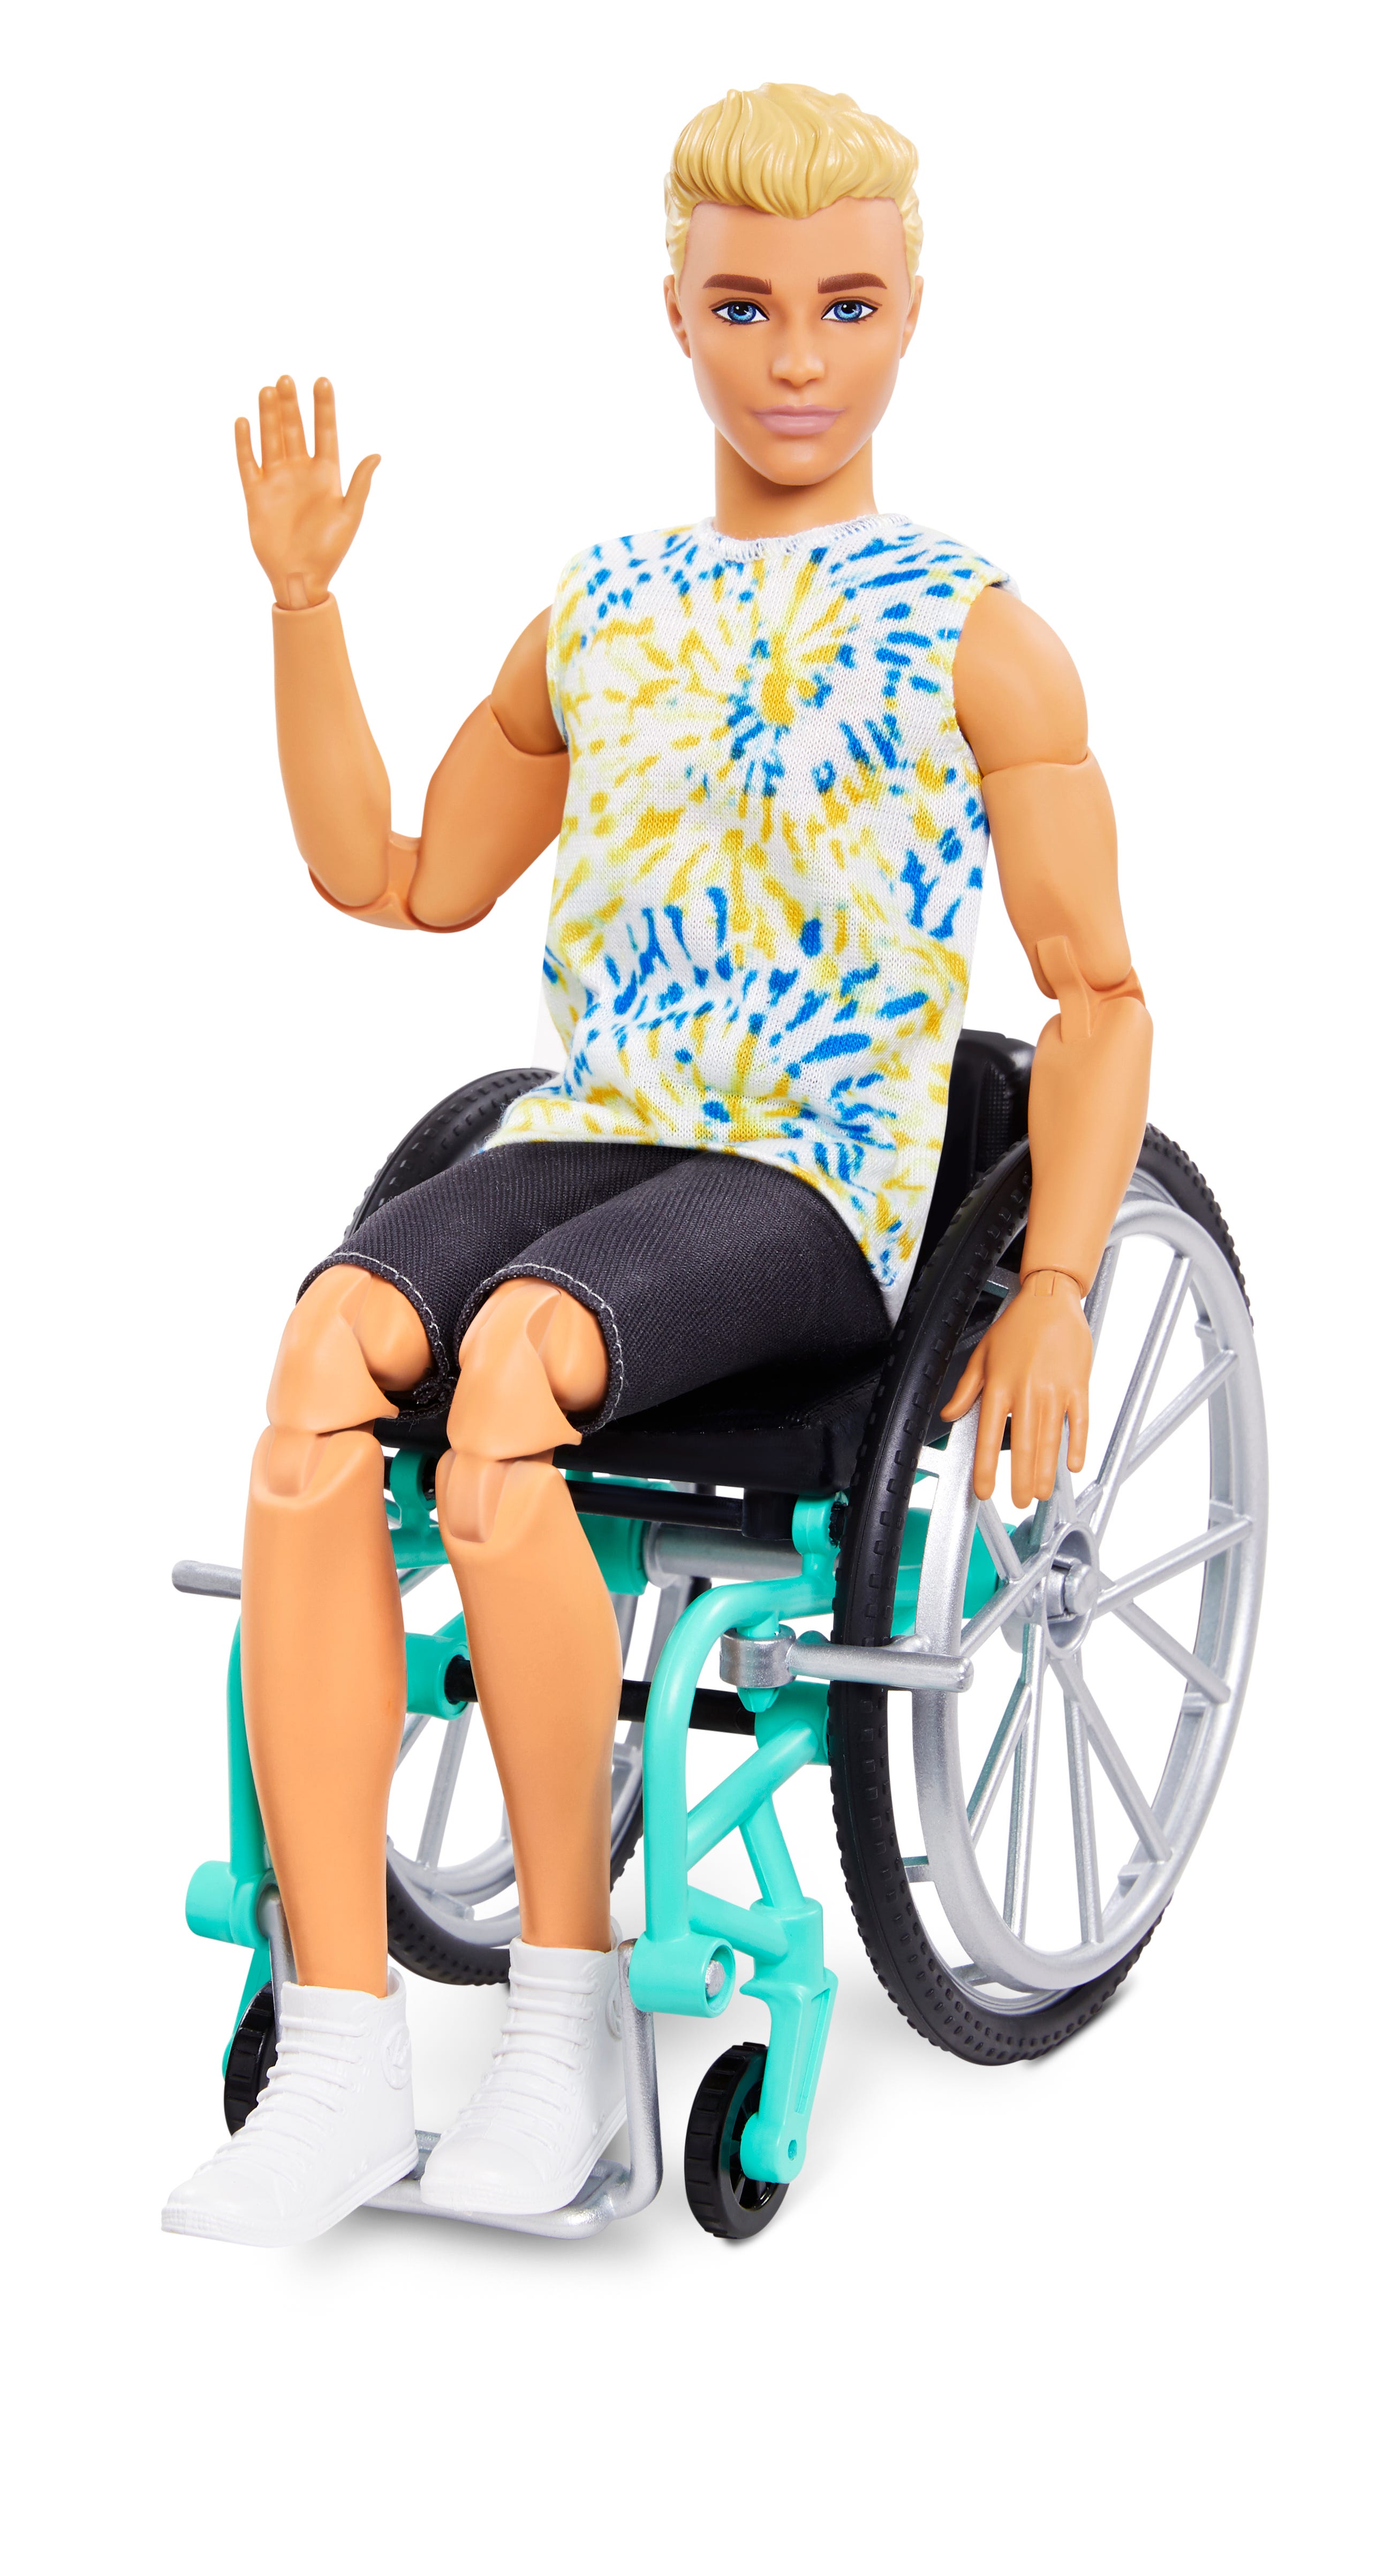 Ingang Ijver Uitwisseling Ken doll turns 60: Barbie counterpart has changed a lot. See how